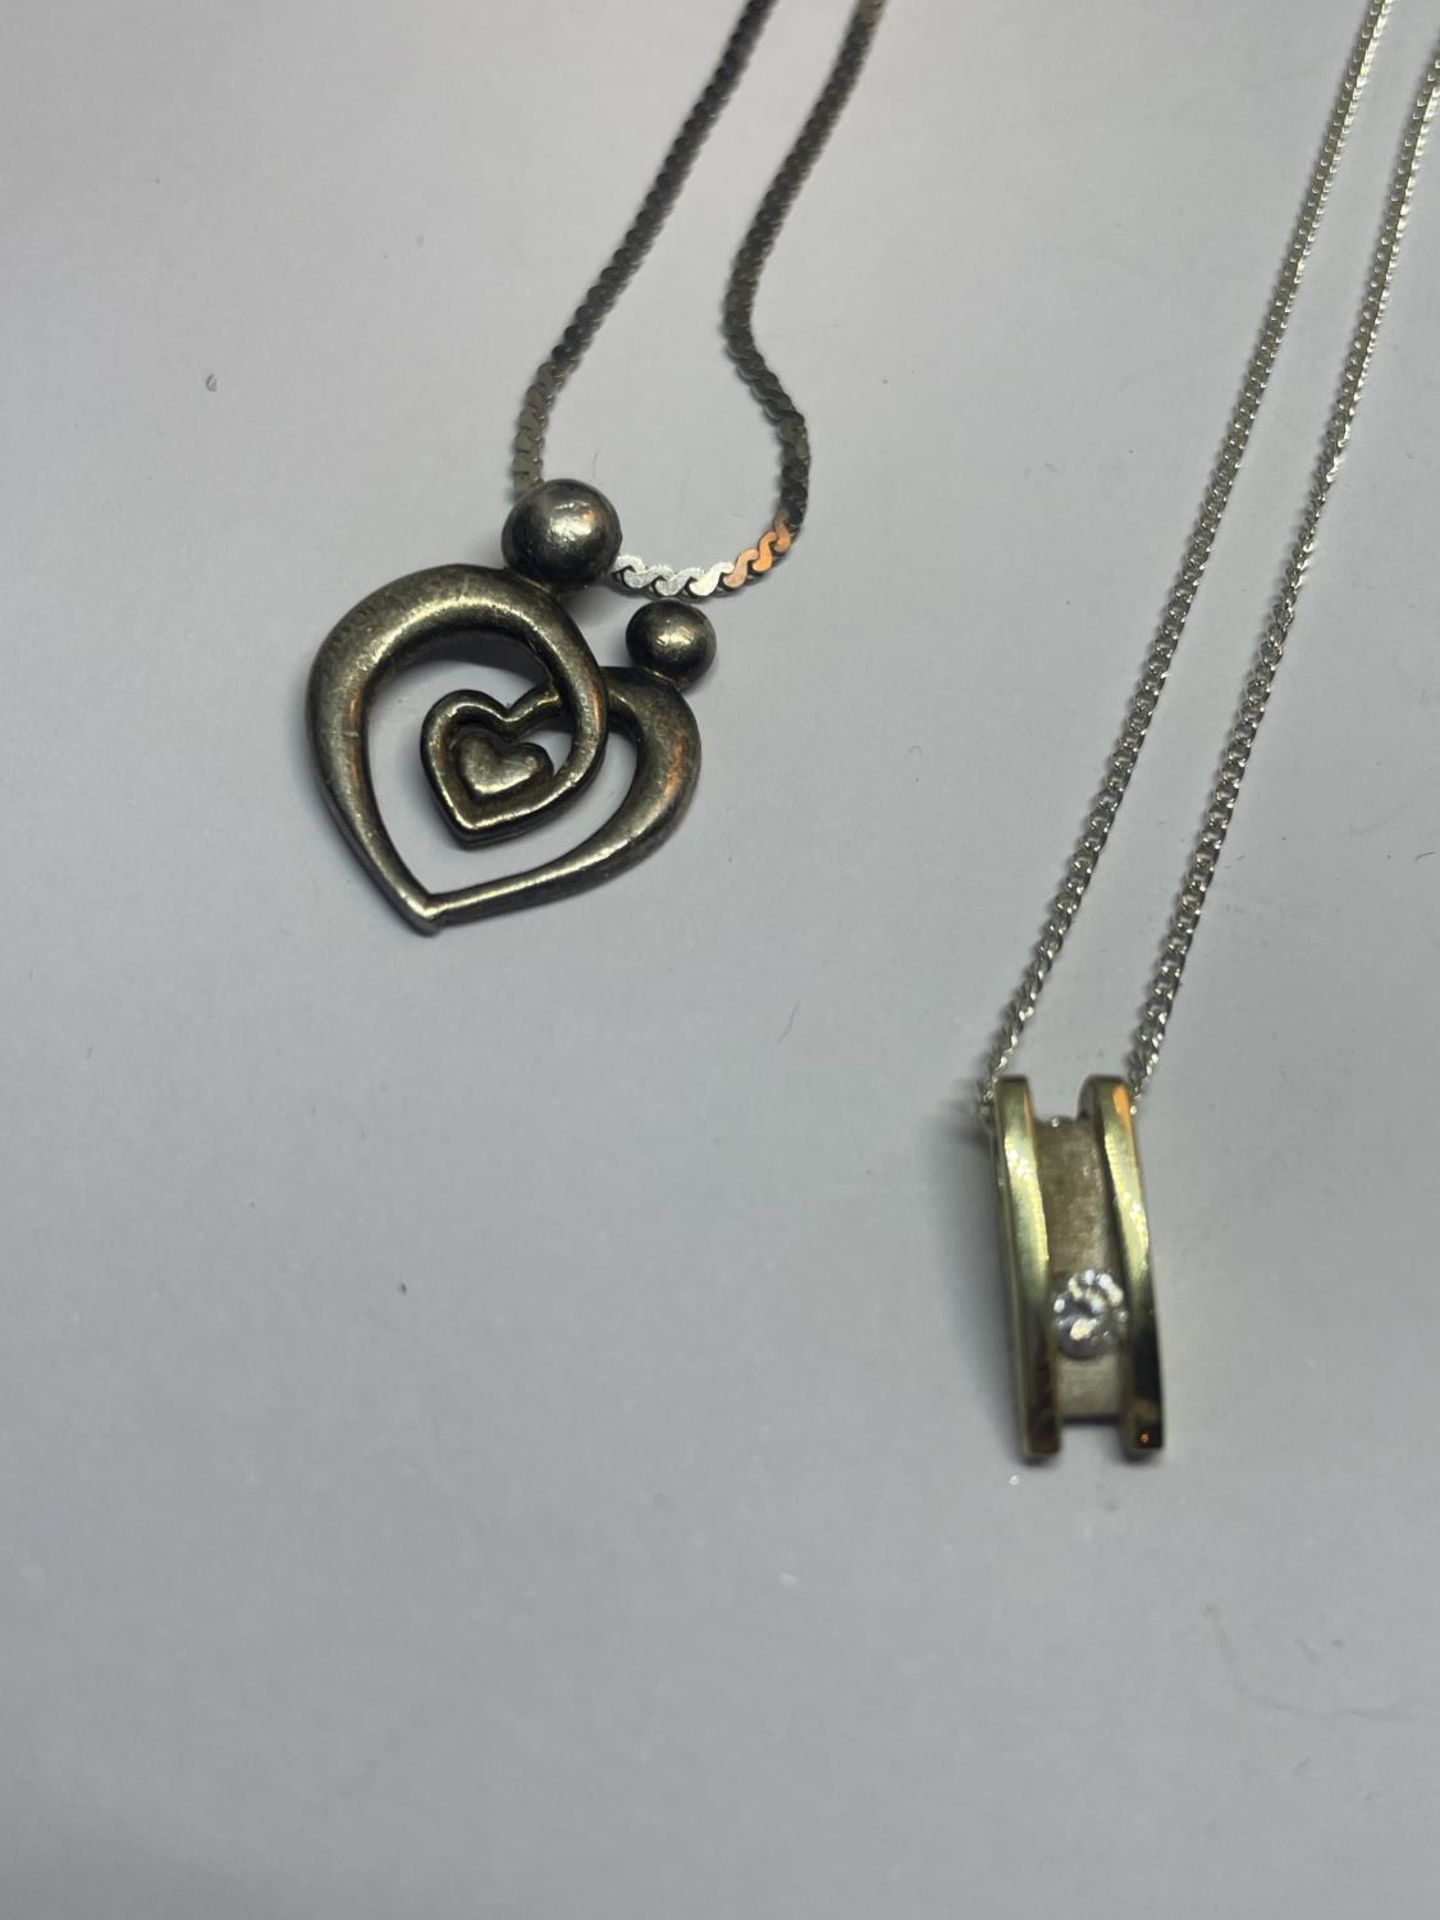 FOUR SILVER NECKLACES WITH PENDANTS - Image 2 of 3